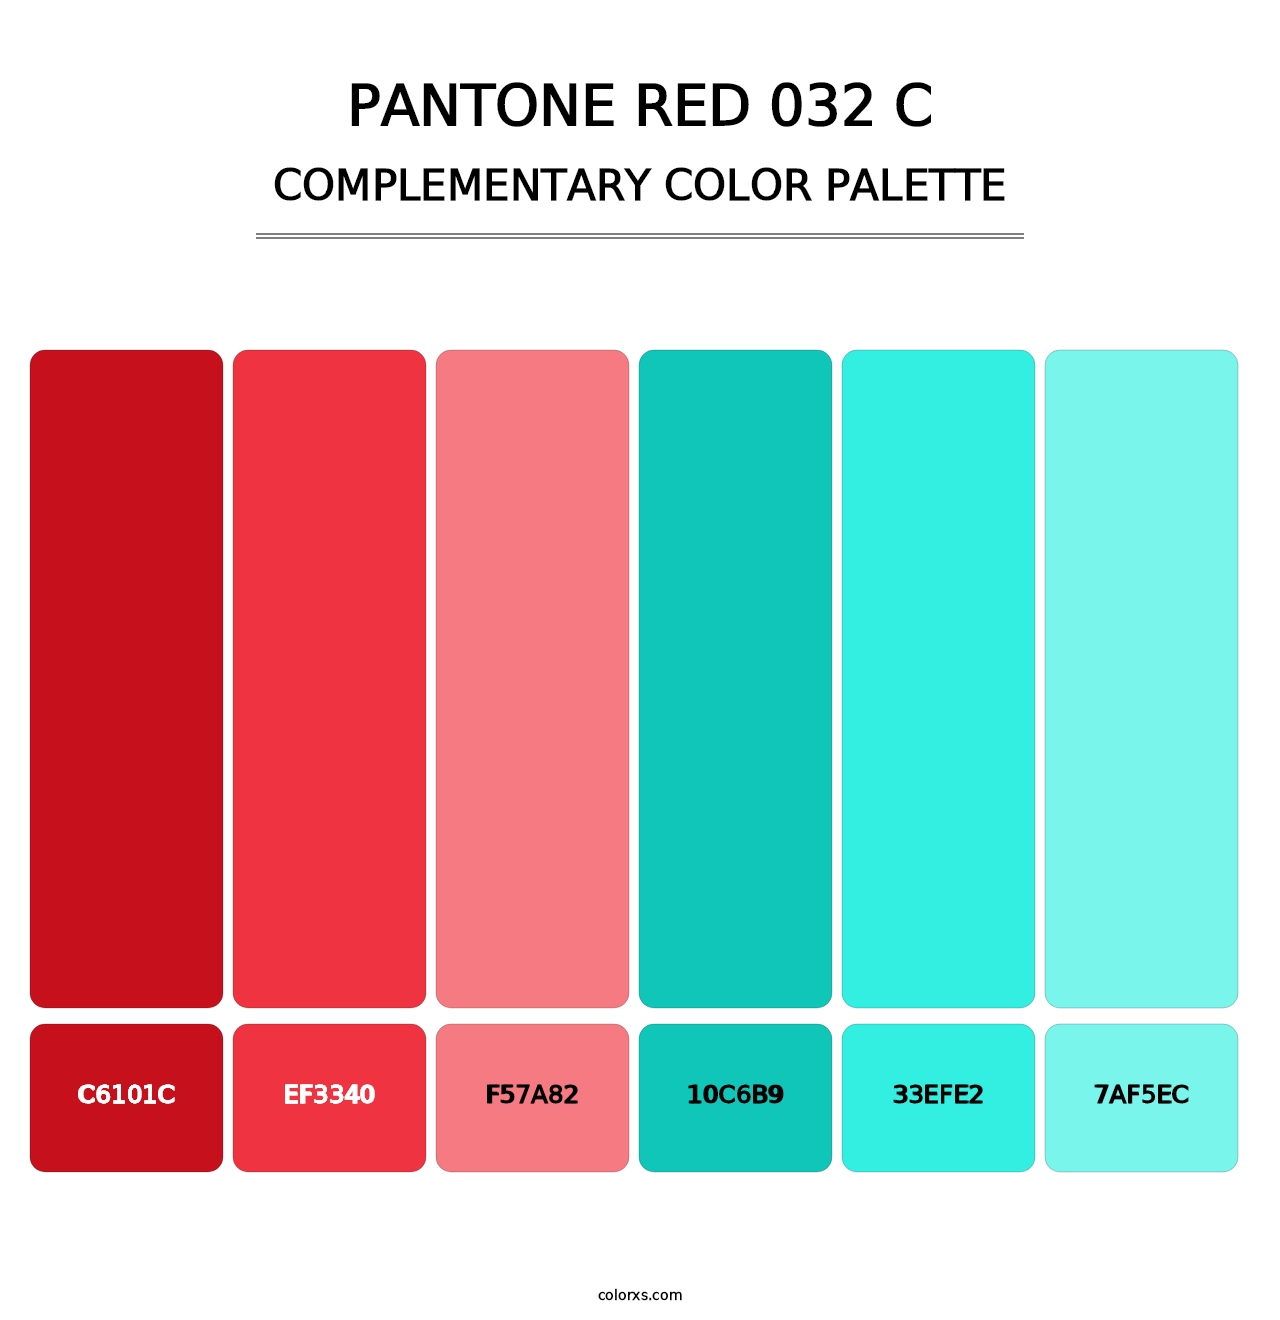 PANTONE Red 032 C - Complementary Color Palette